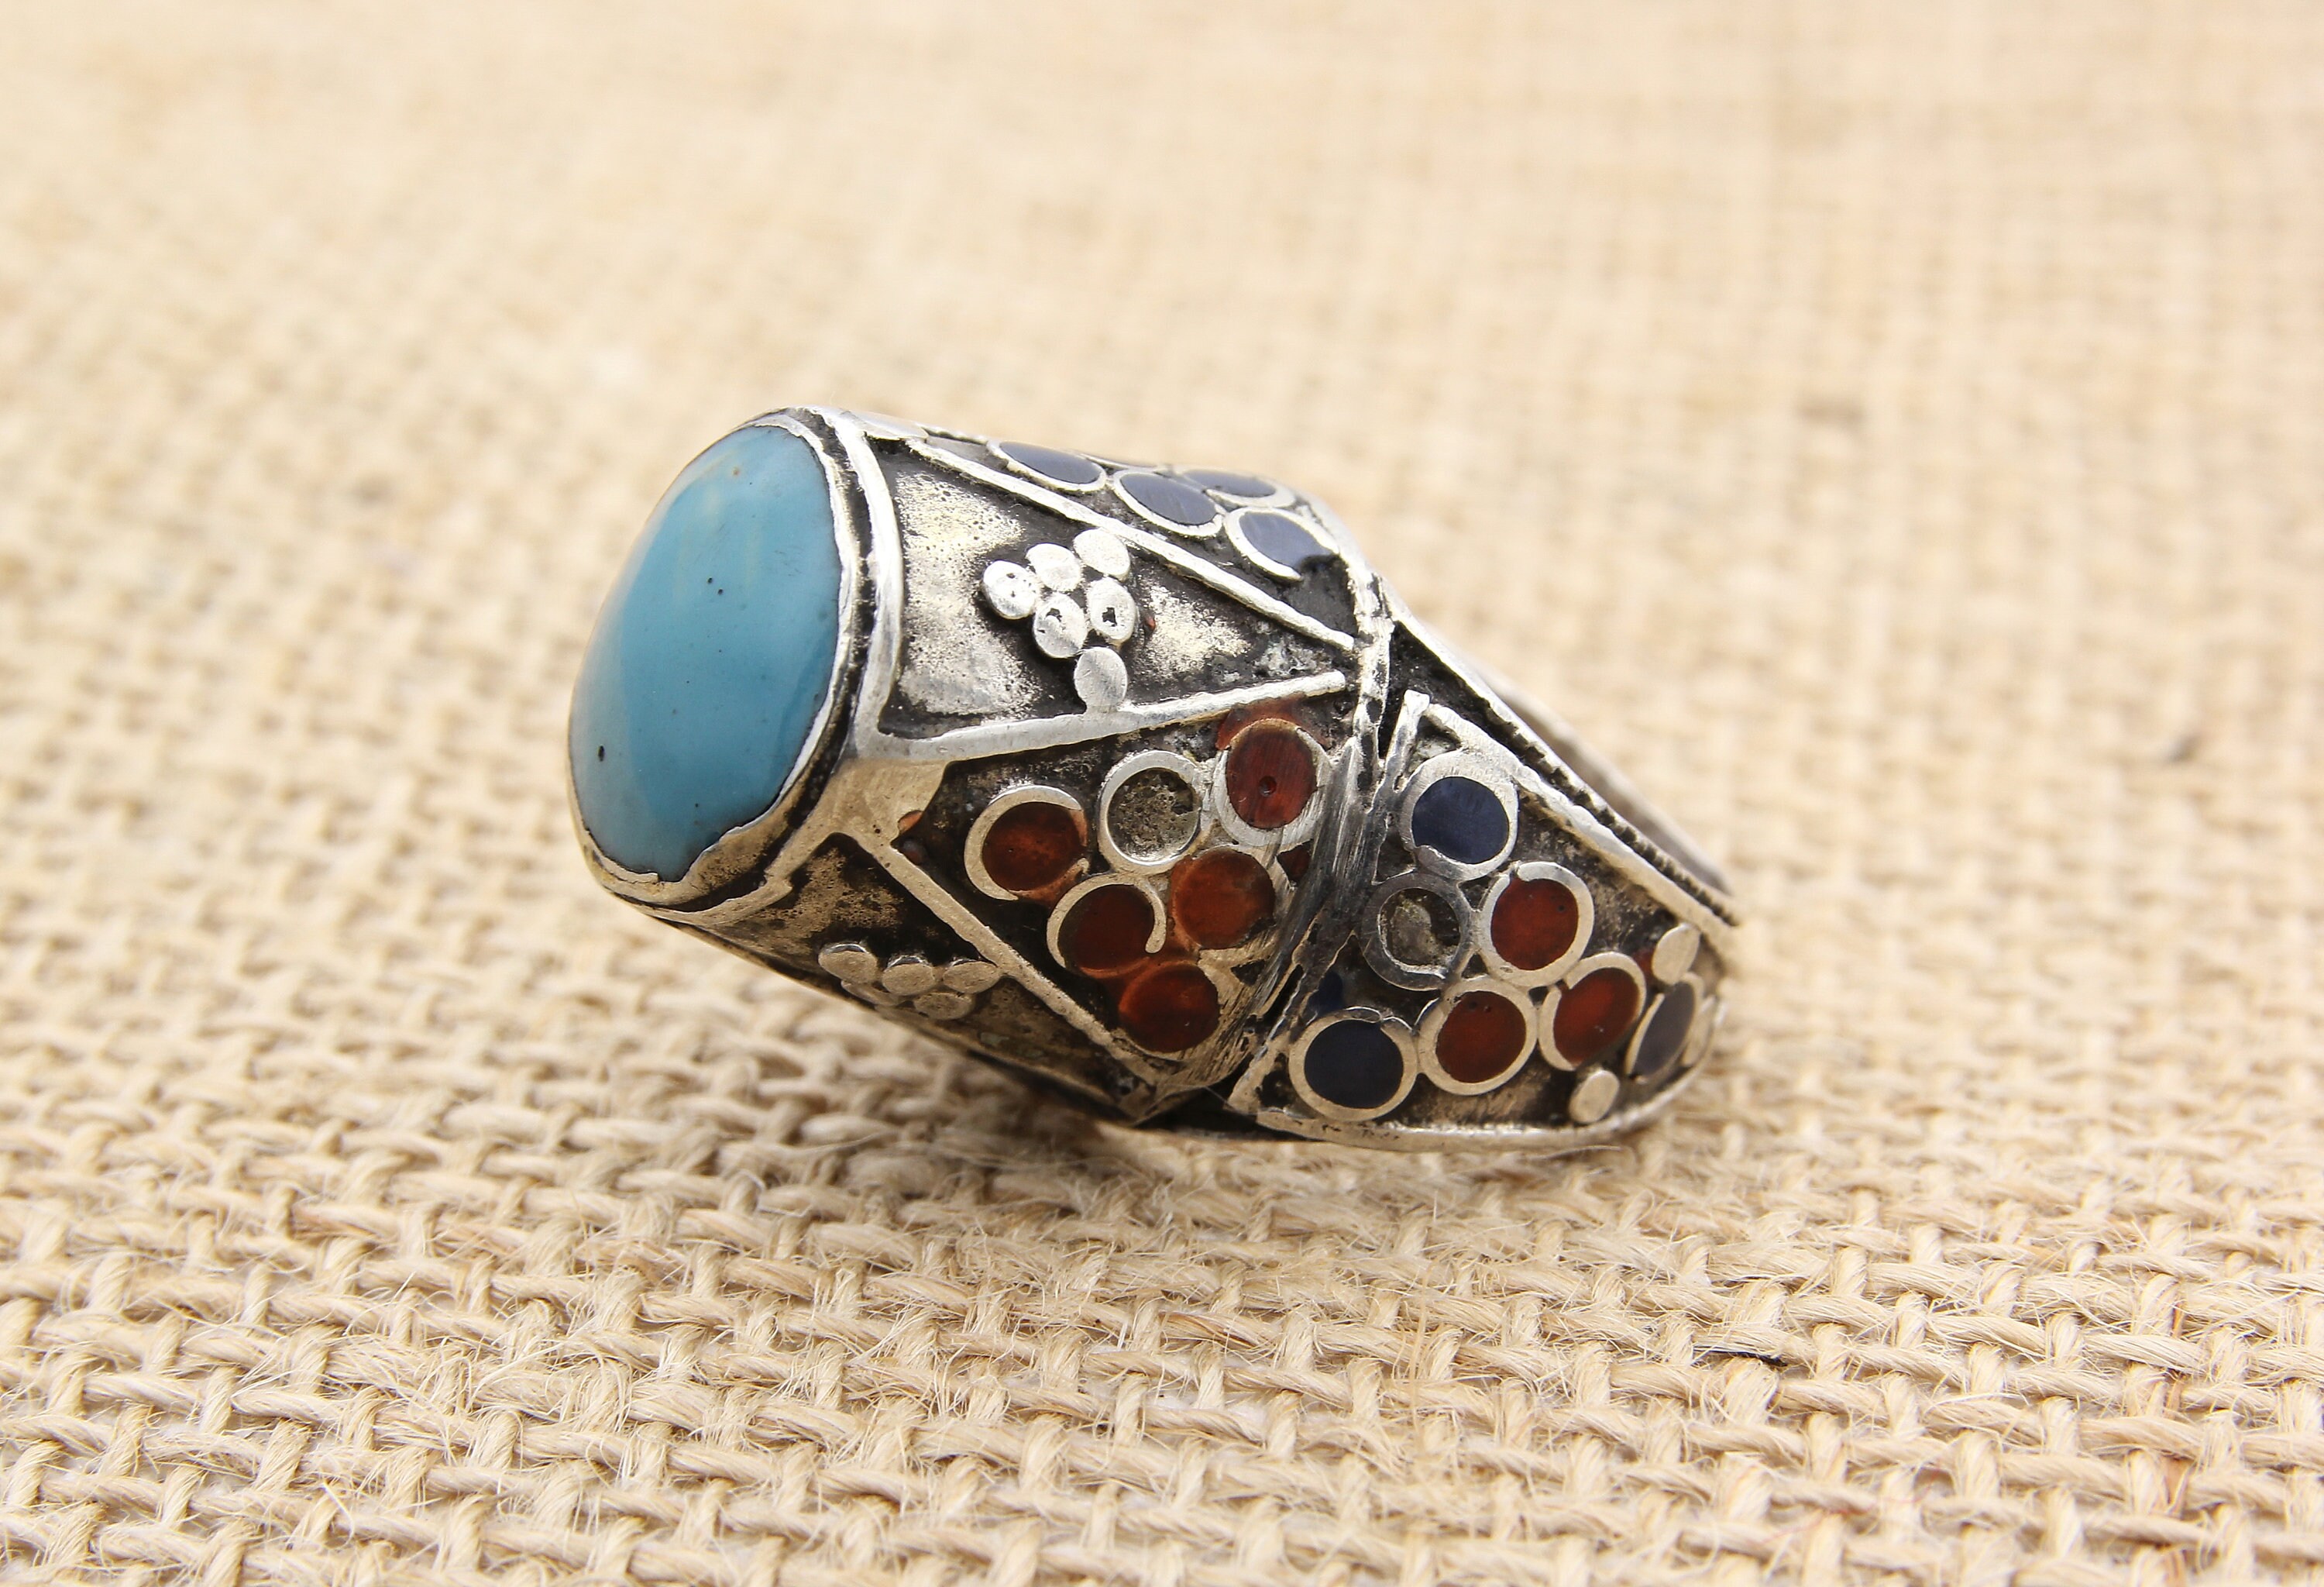 Details about   Lapis Turquoise Bird Ring Afghan Kuchi Tribal Alpaca Silver Ring Size 8 US 